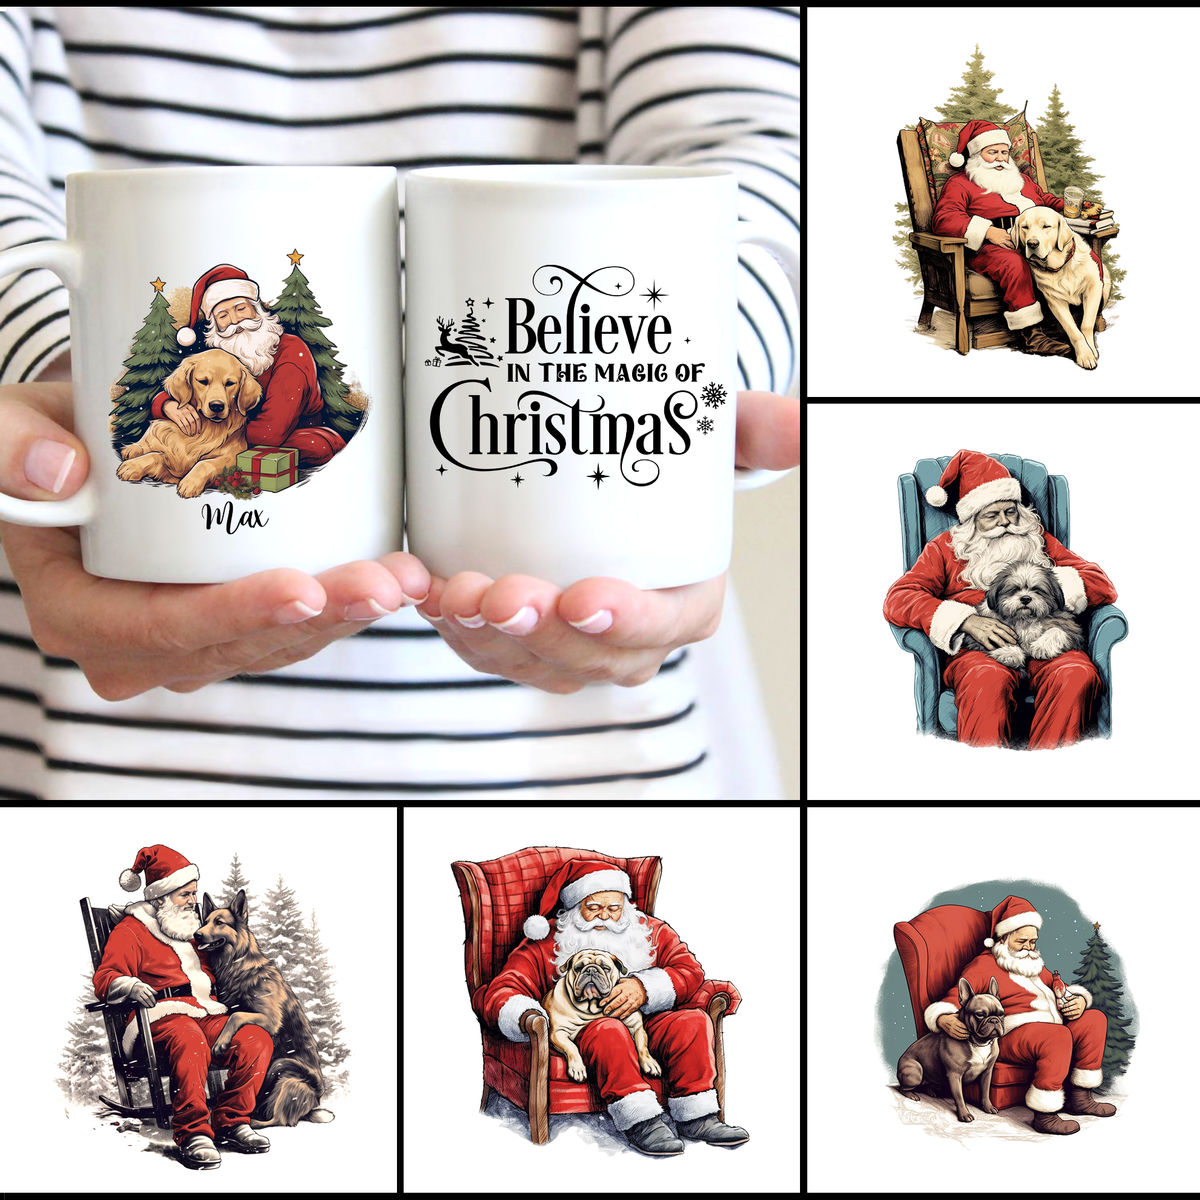 Sleeping Dog With Santa Claus - Believe in The Magic of Christmas